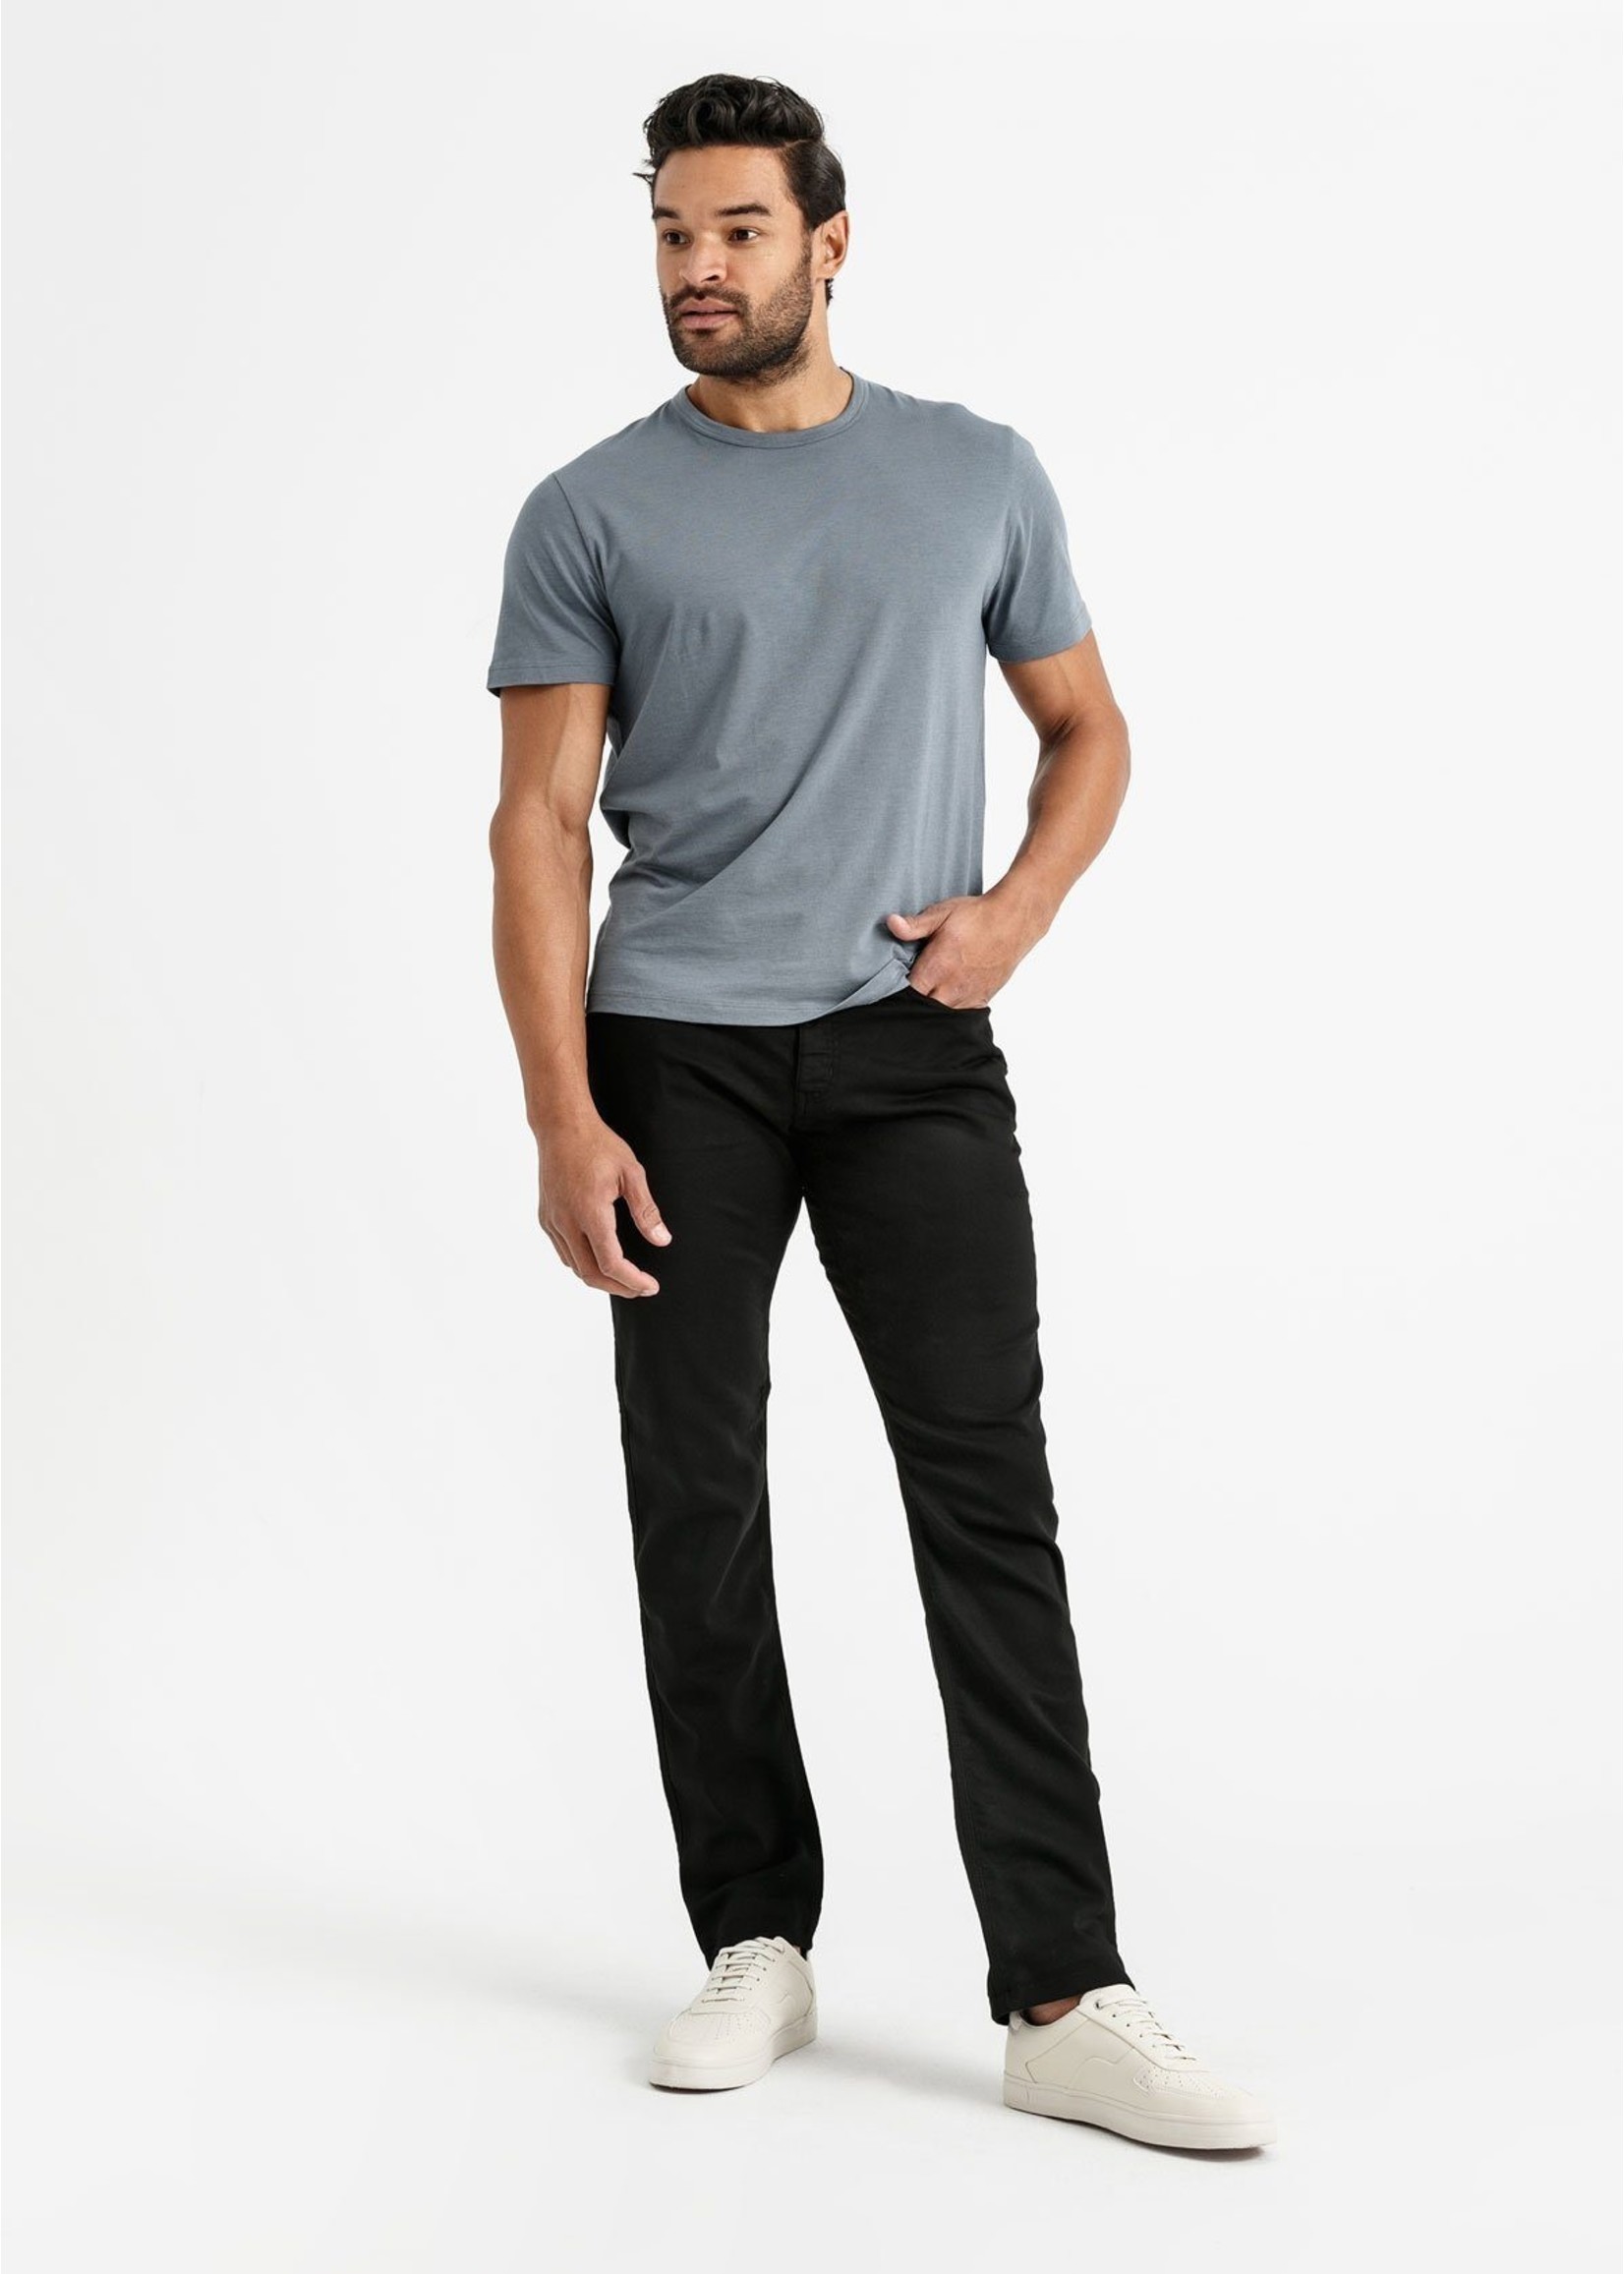 DUER No Sweat Pant Relaxed